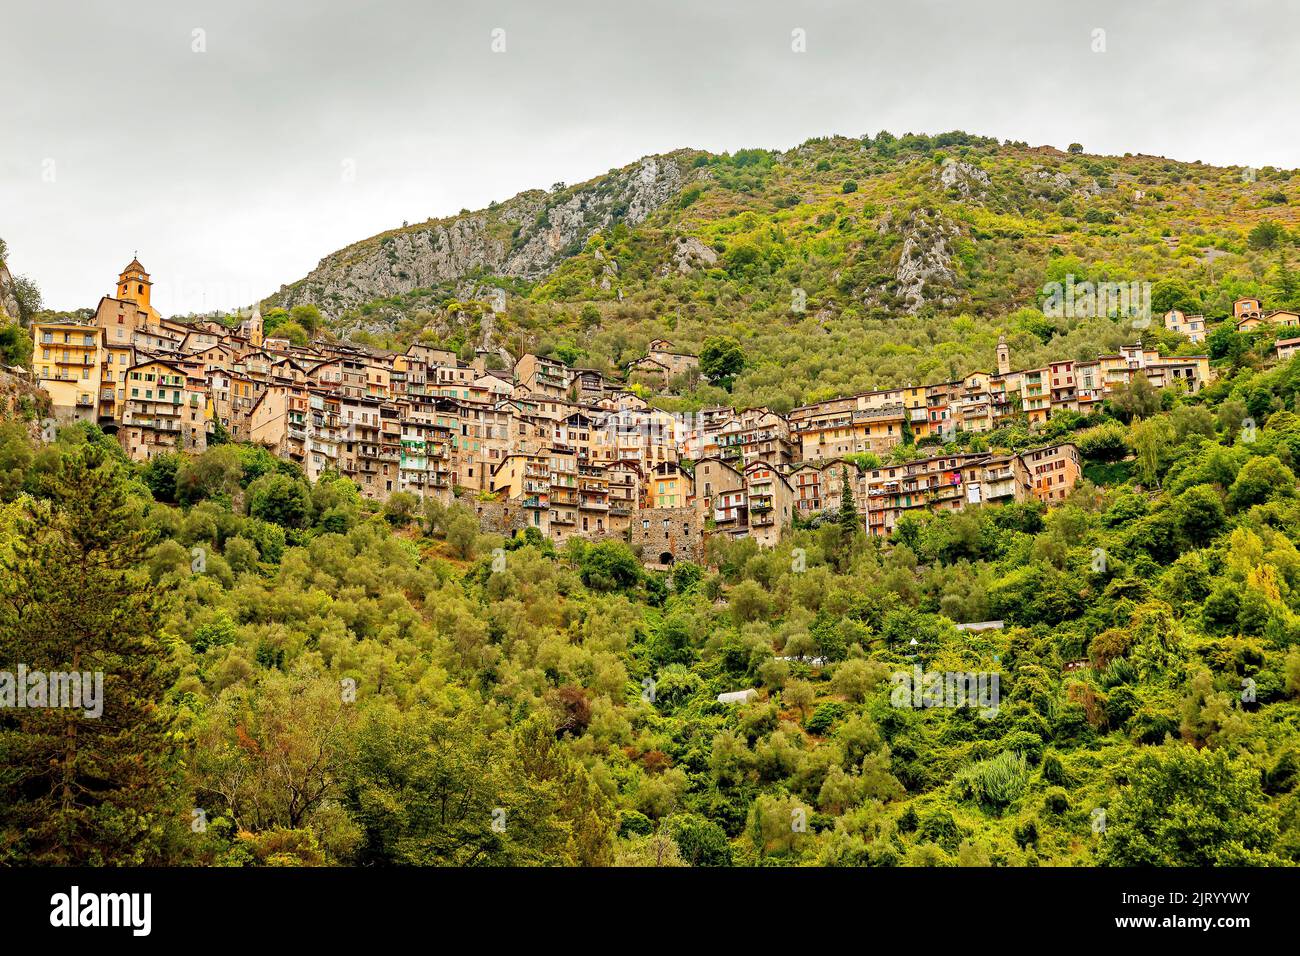 Saorge is a very beautiful medieval town in Alpes-Maritimes department in southeastern France. Stock Photo